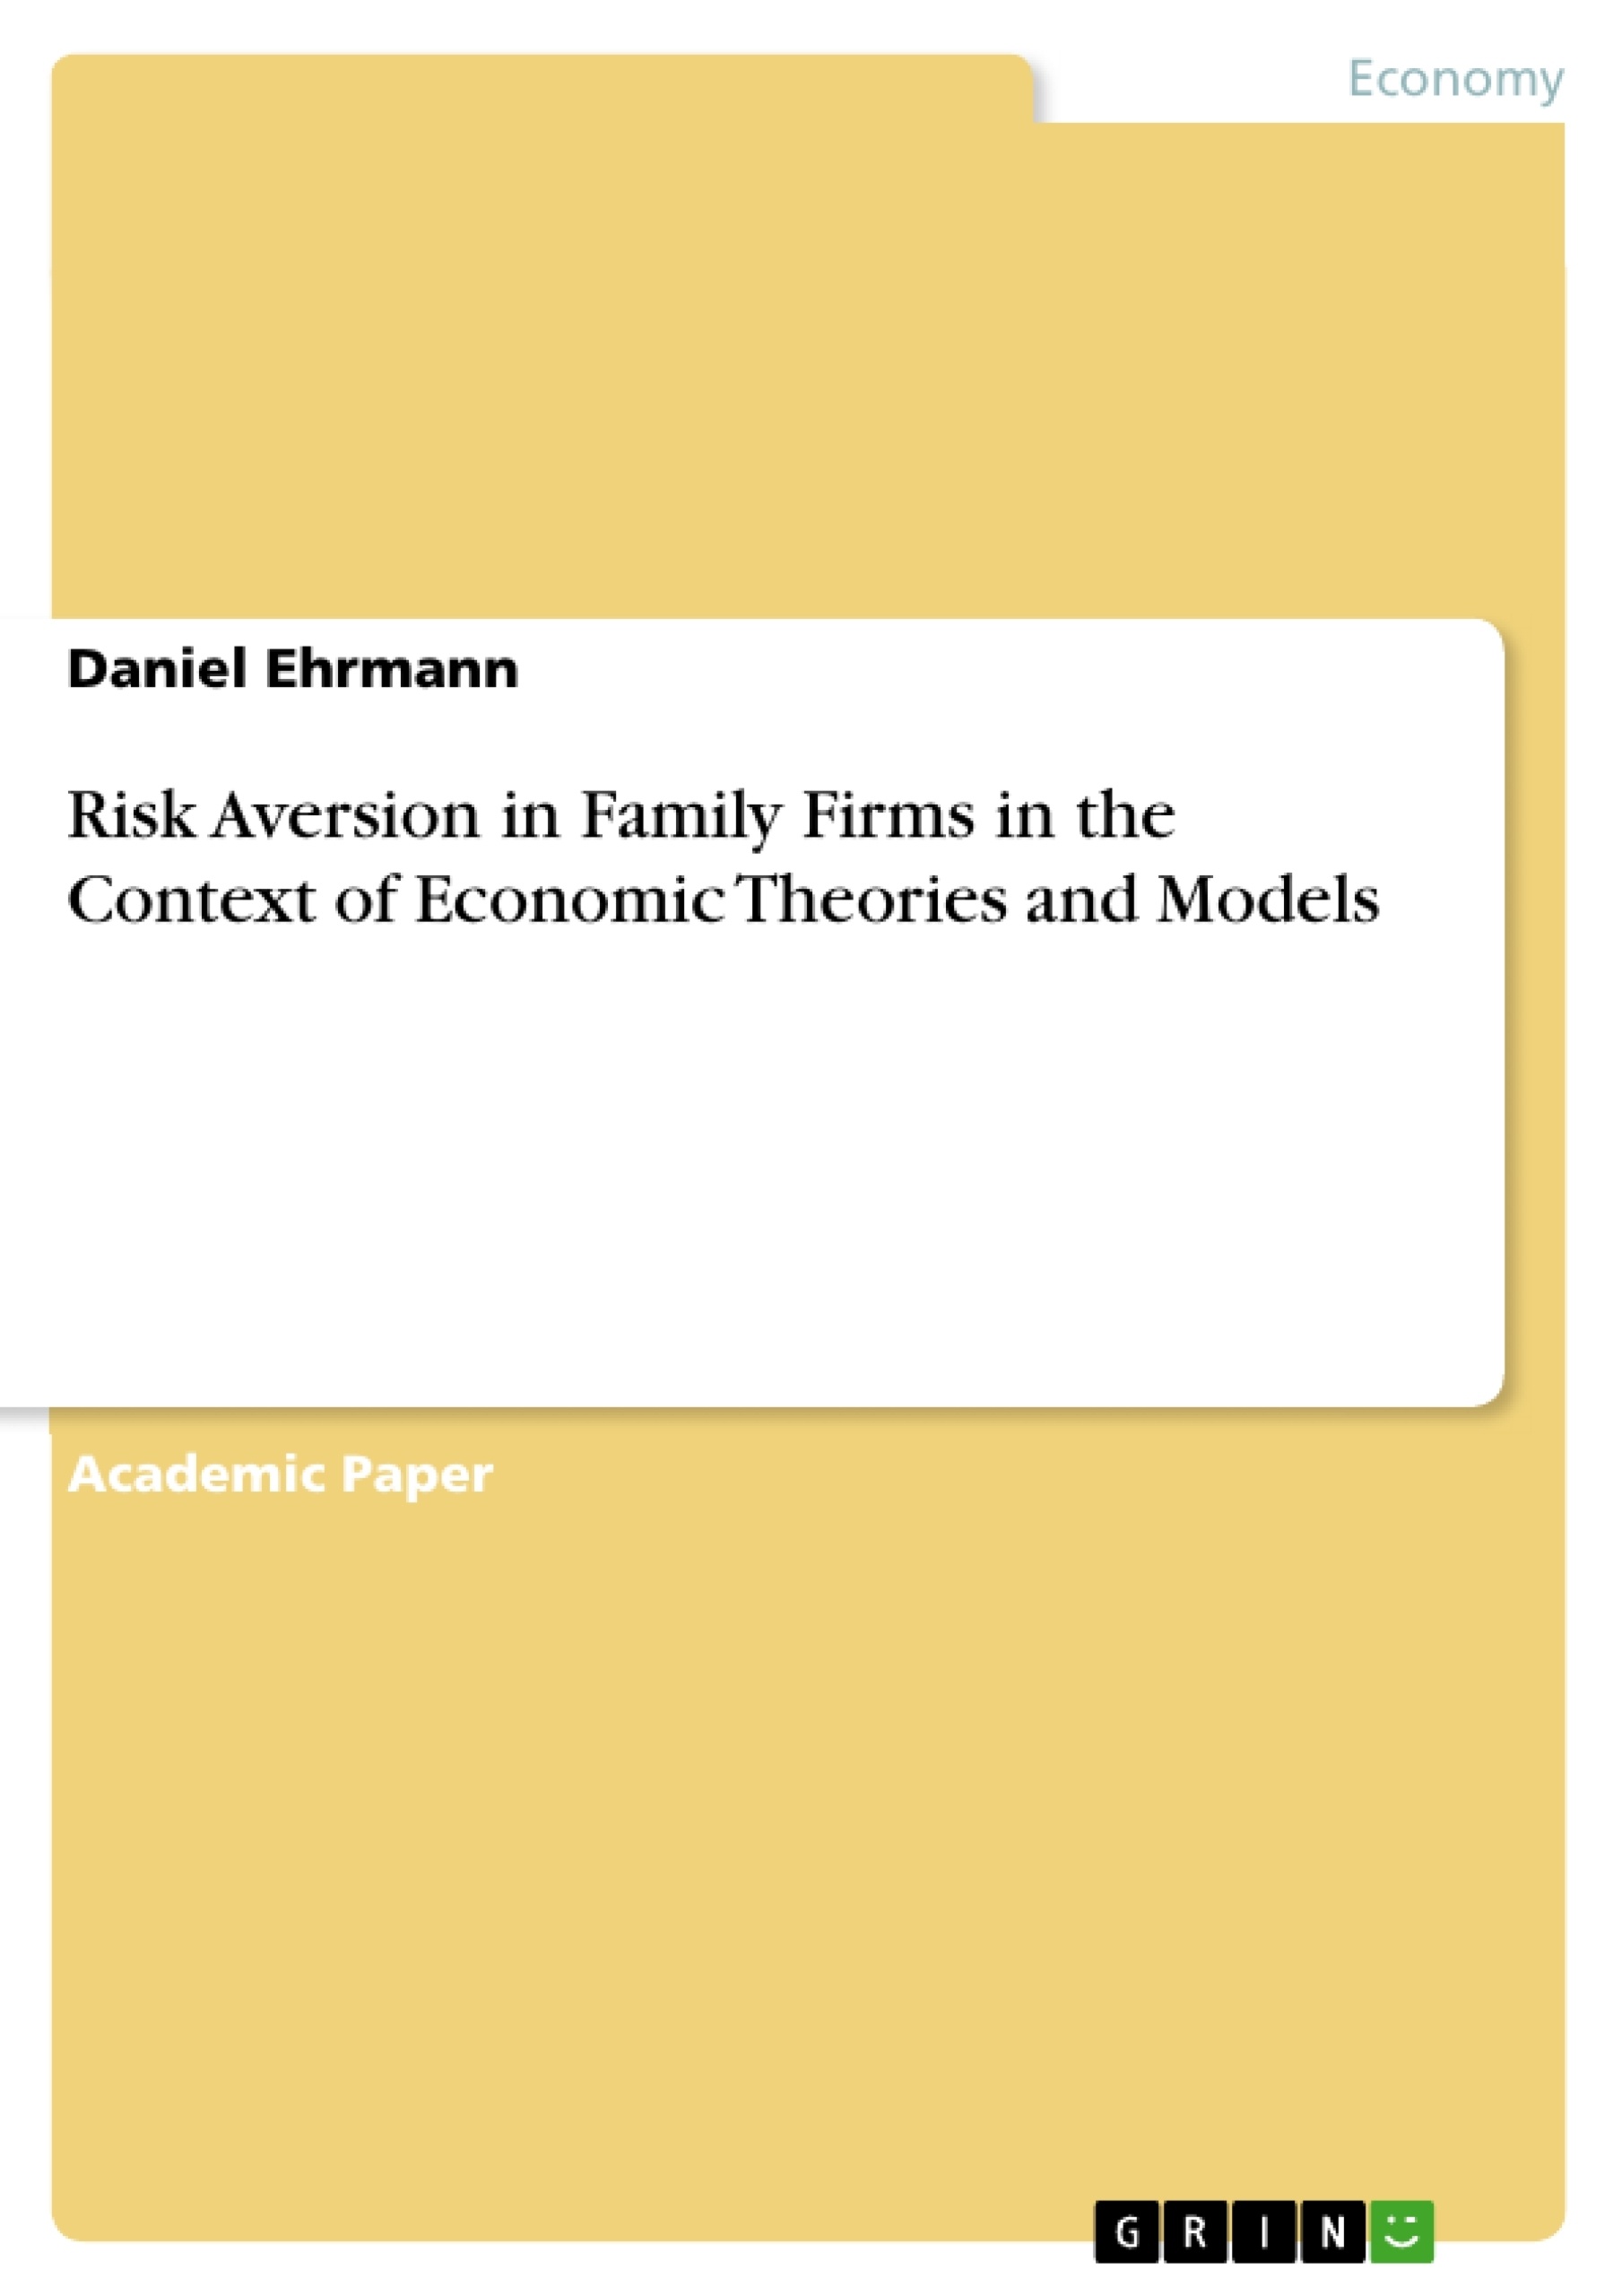 Titre: Risk Aversion in Family Firms in the Context of Economic Theories and Models